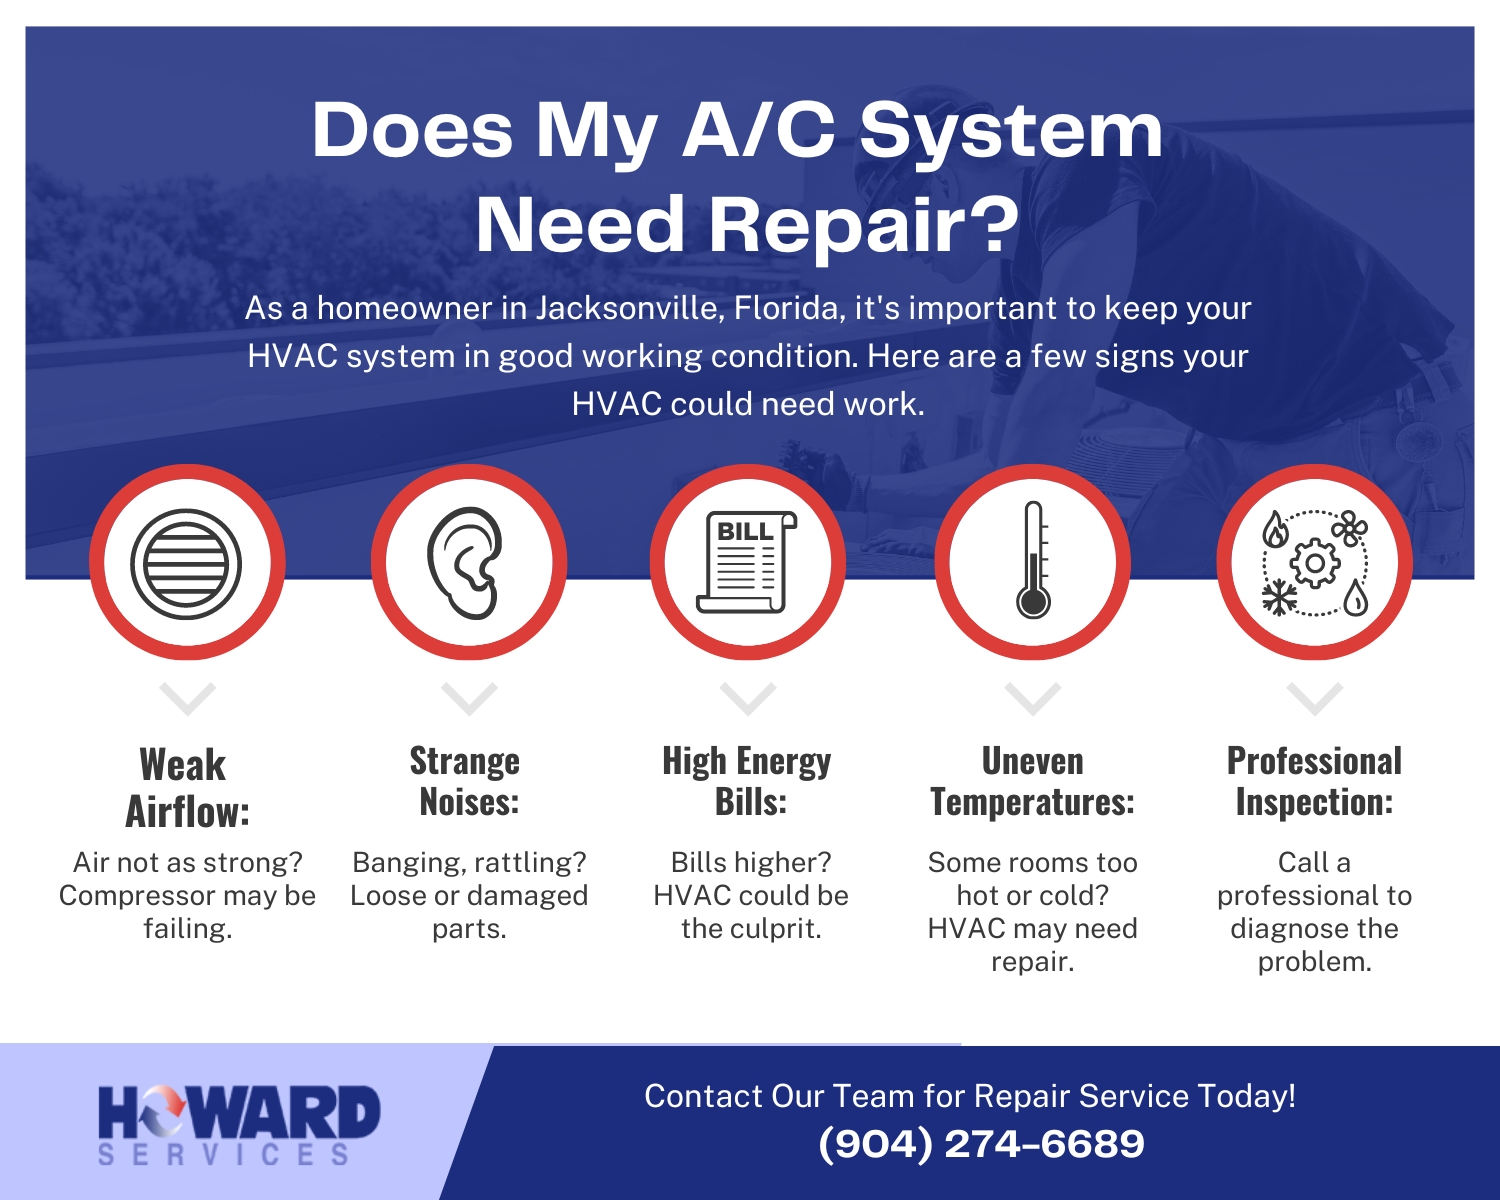 Does My A/C System Need Repair - Infographic